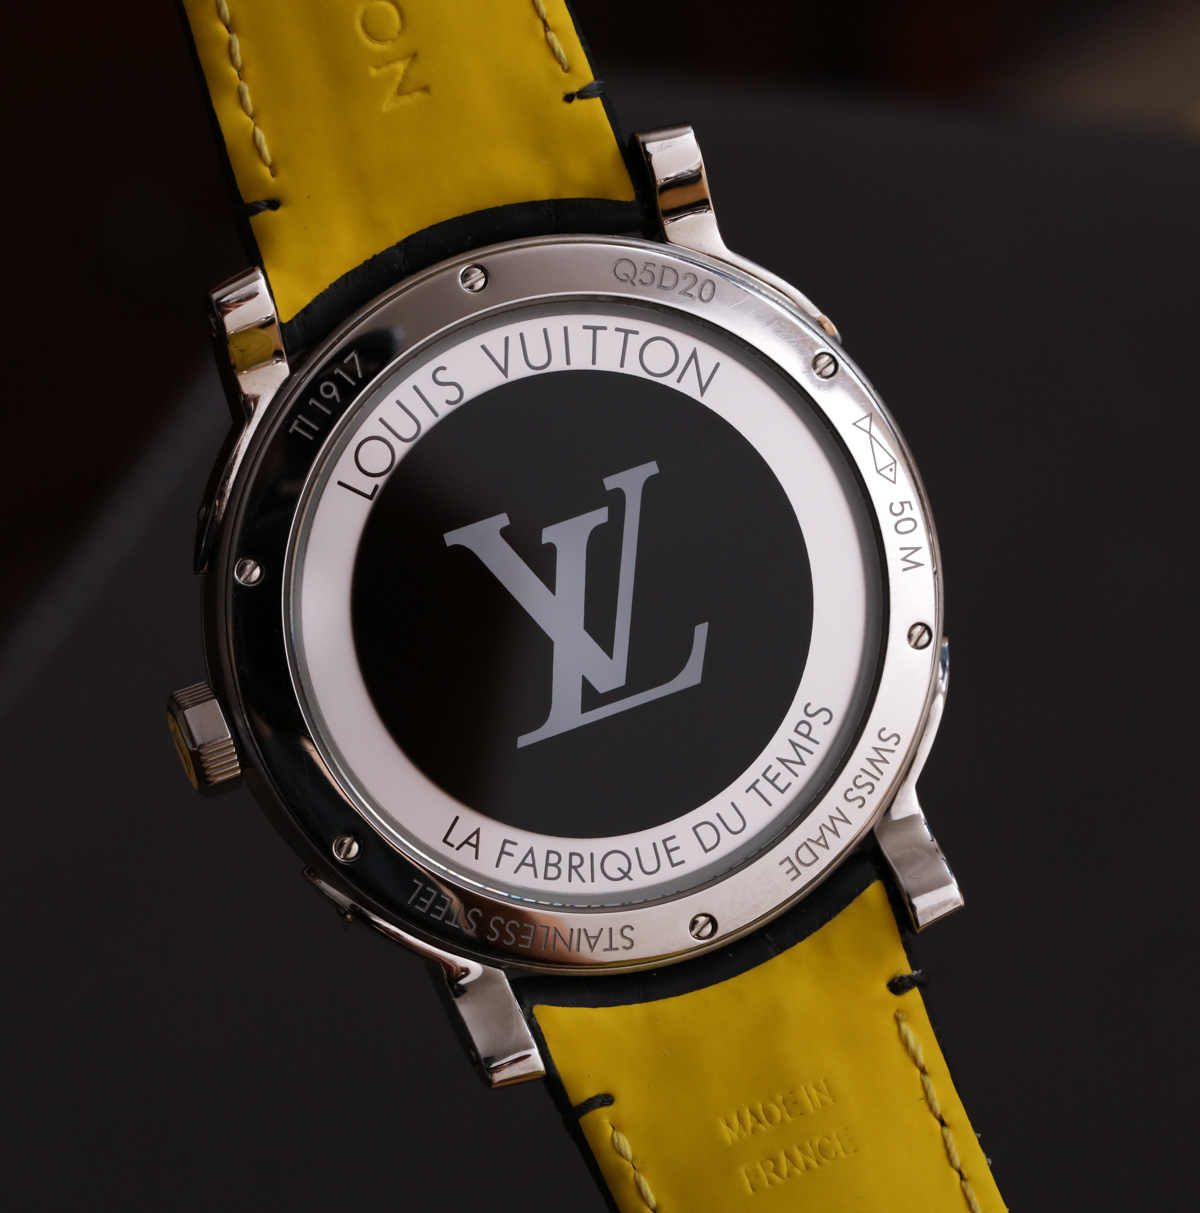 REVIEW: Five Days With The Louis Vuitton Escale Time Zone (With Original  Photos & Price)